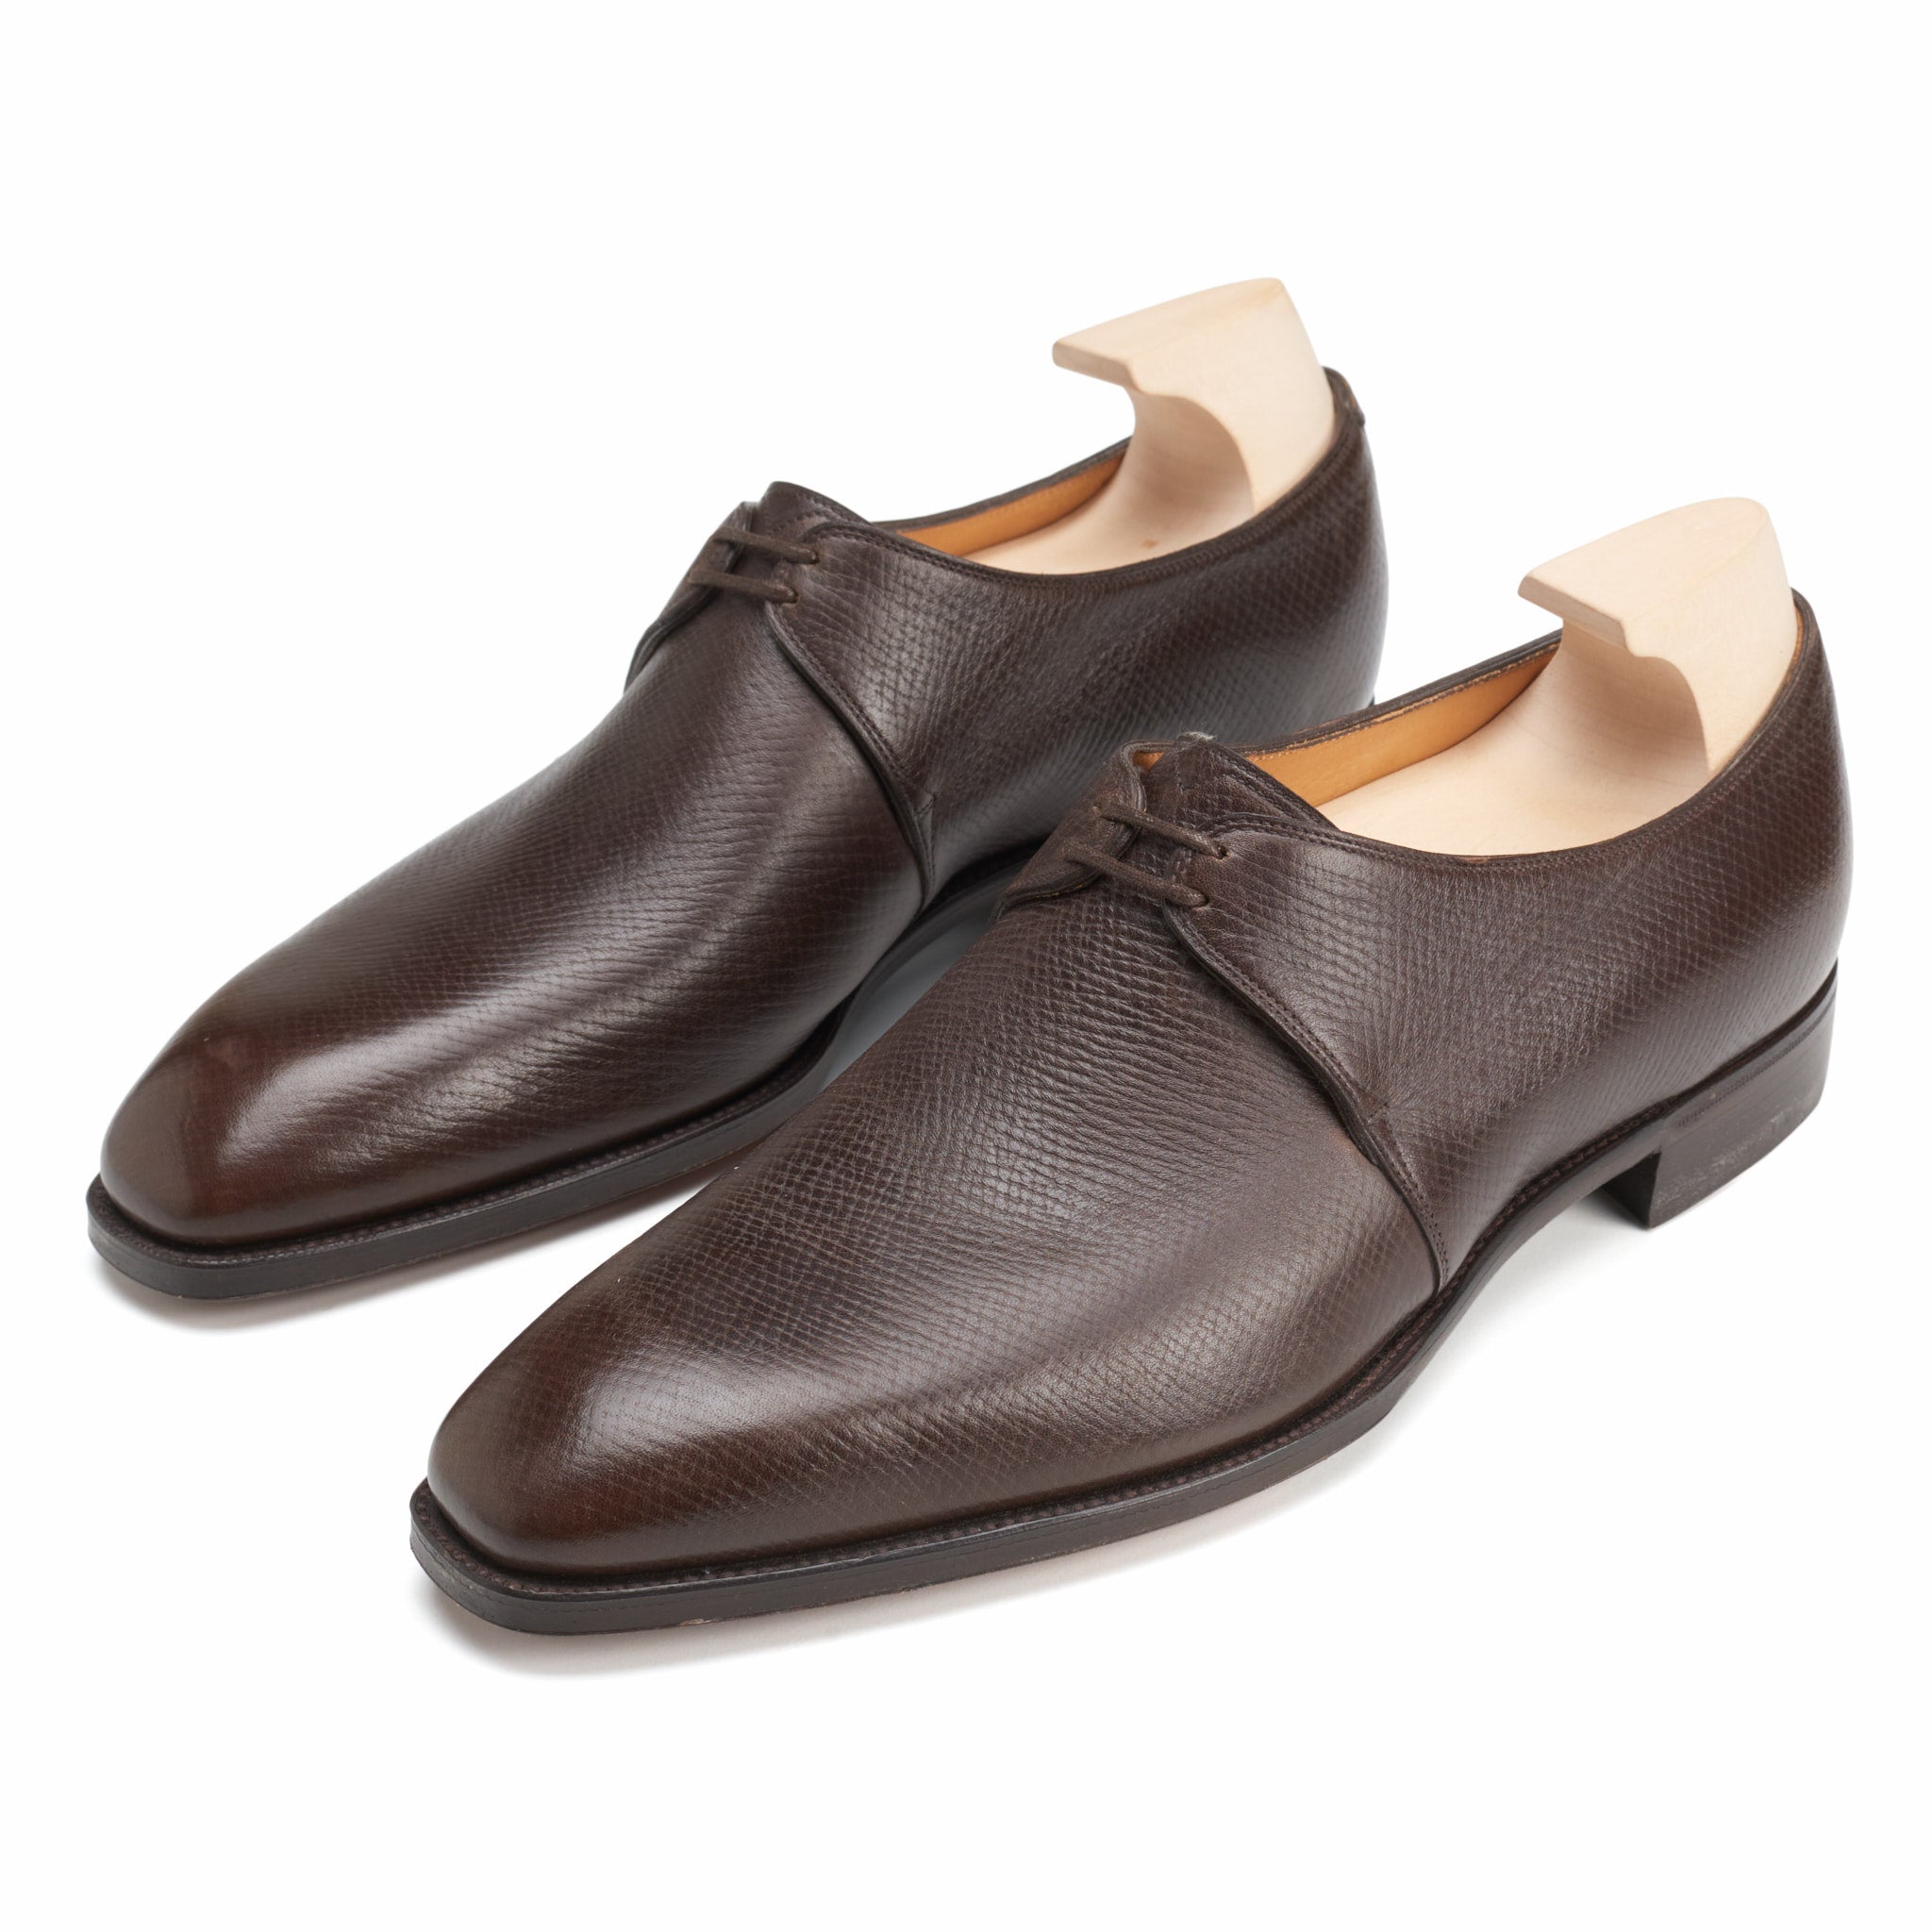 GAZIANO & GIRLING "Wilde" Brown Derby Dress Shoes UK 8E NEW US 8.5 Last MH71 GAZIANO & GIRLING